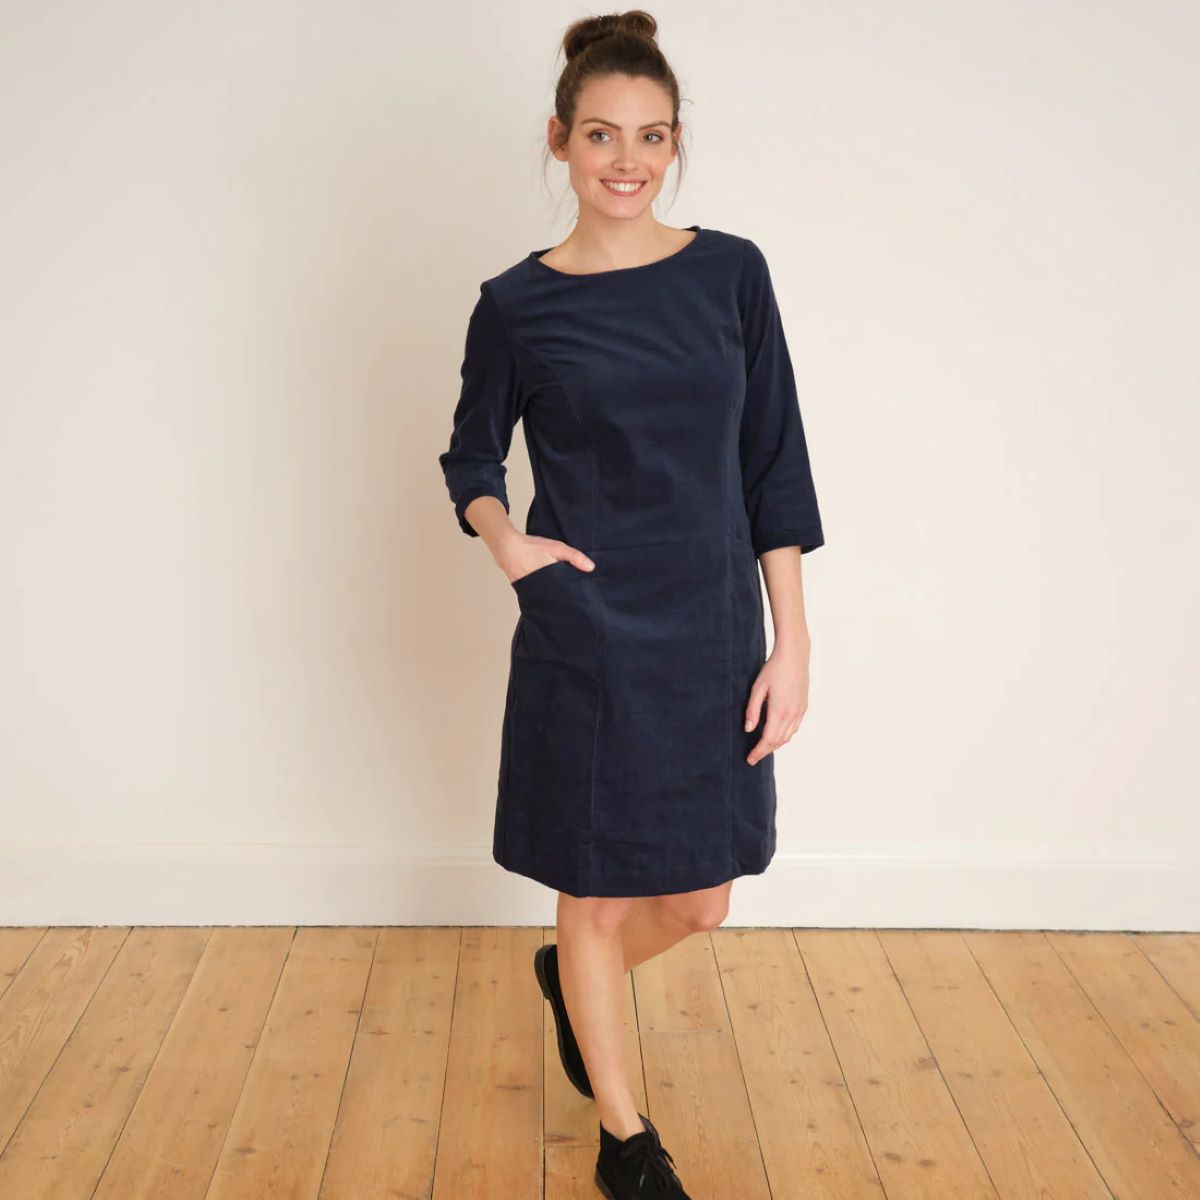 Shift Dresses: The Perfect Style For Every Body Type